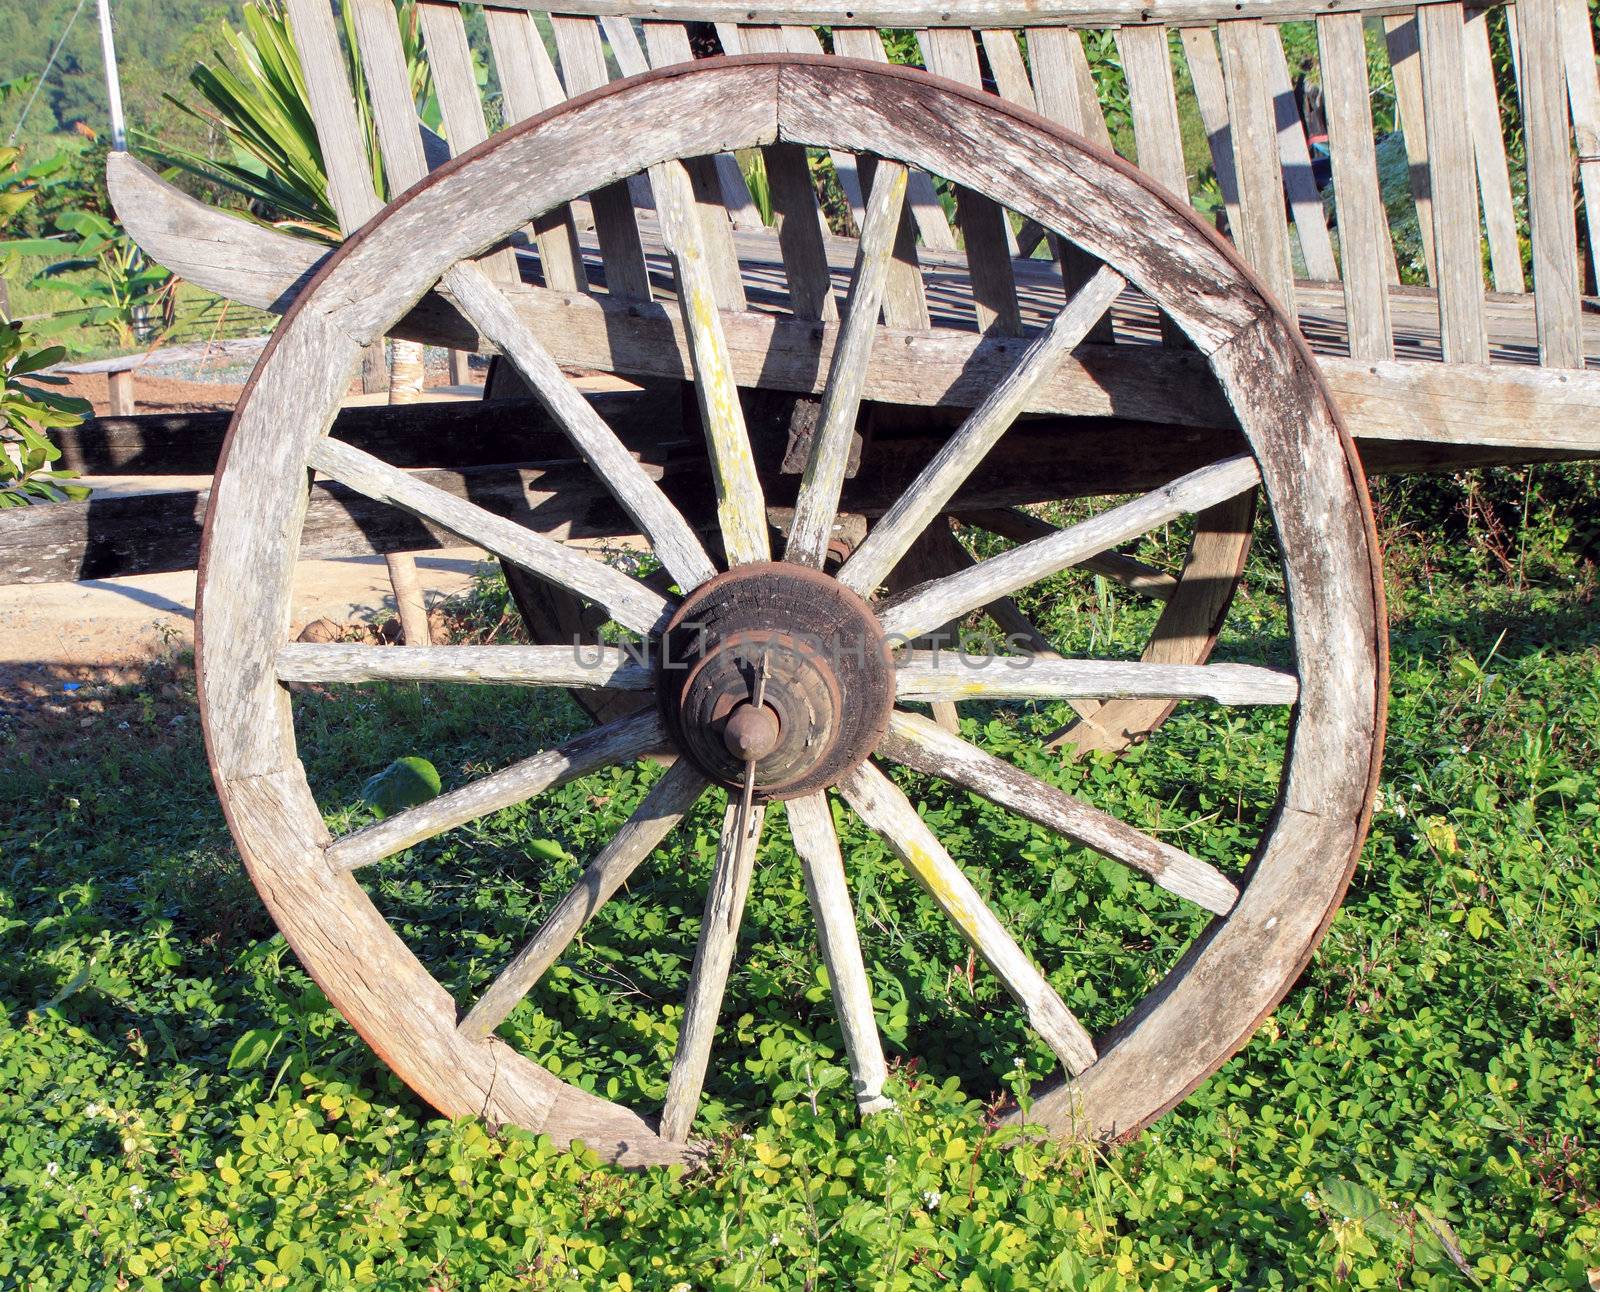 Old wooden wheel of Thais classic vehicles